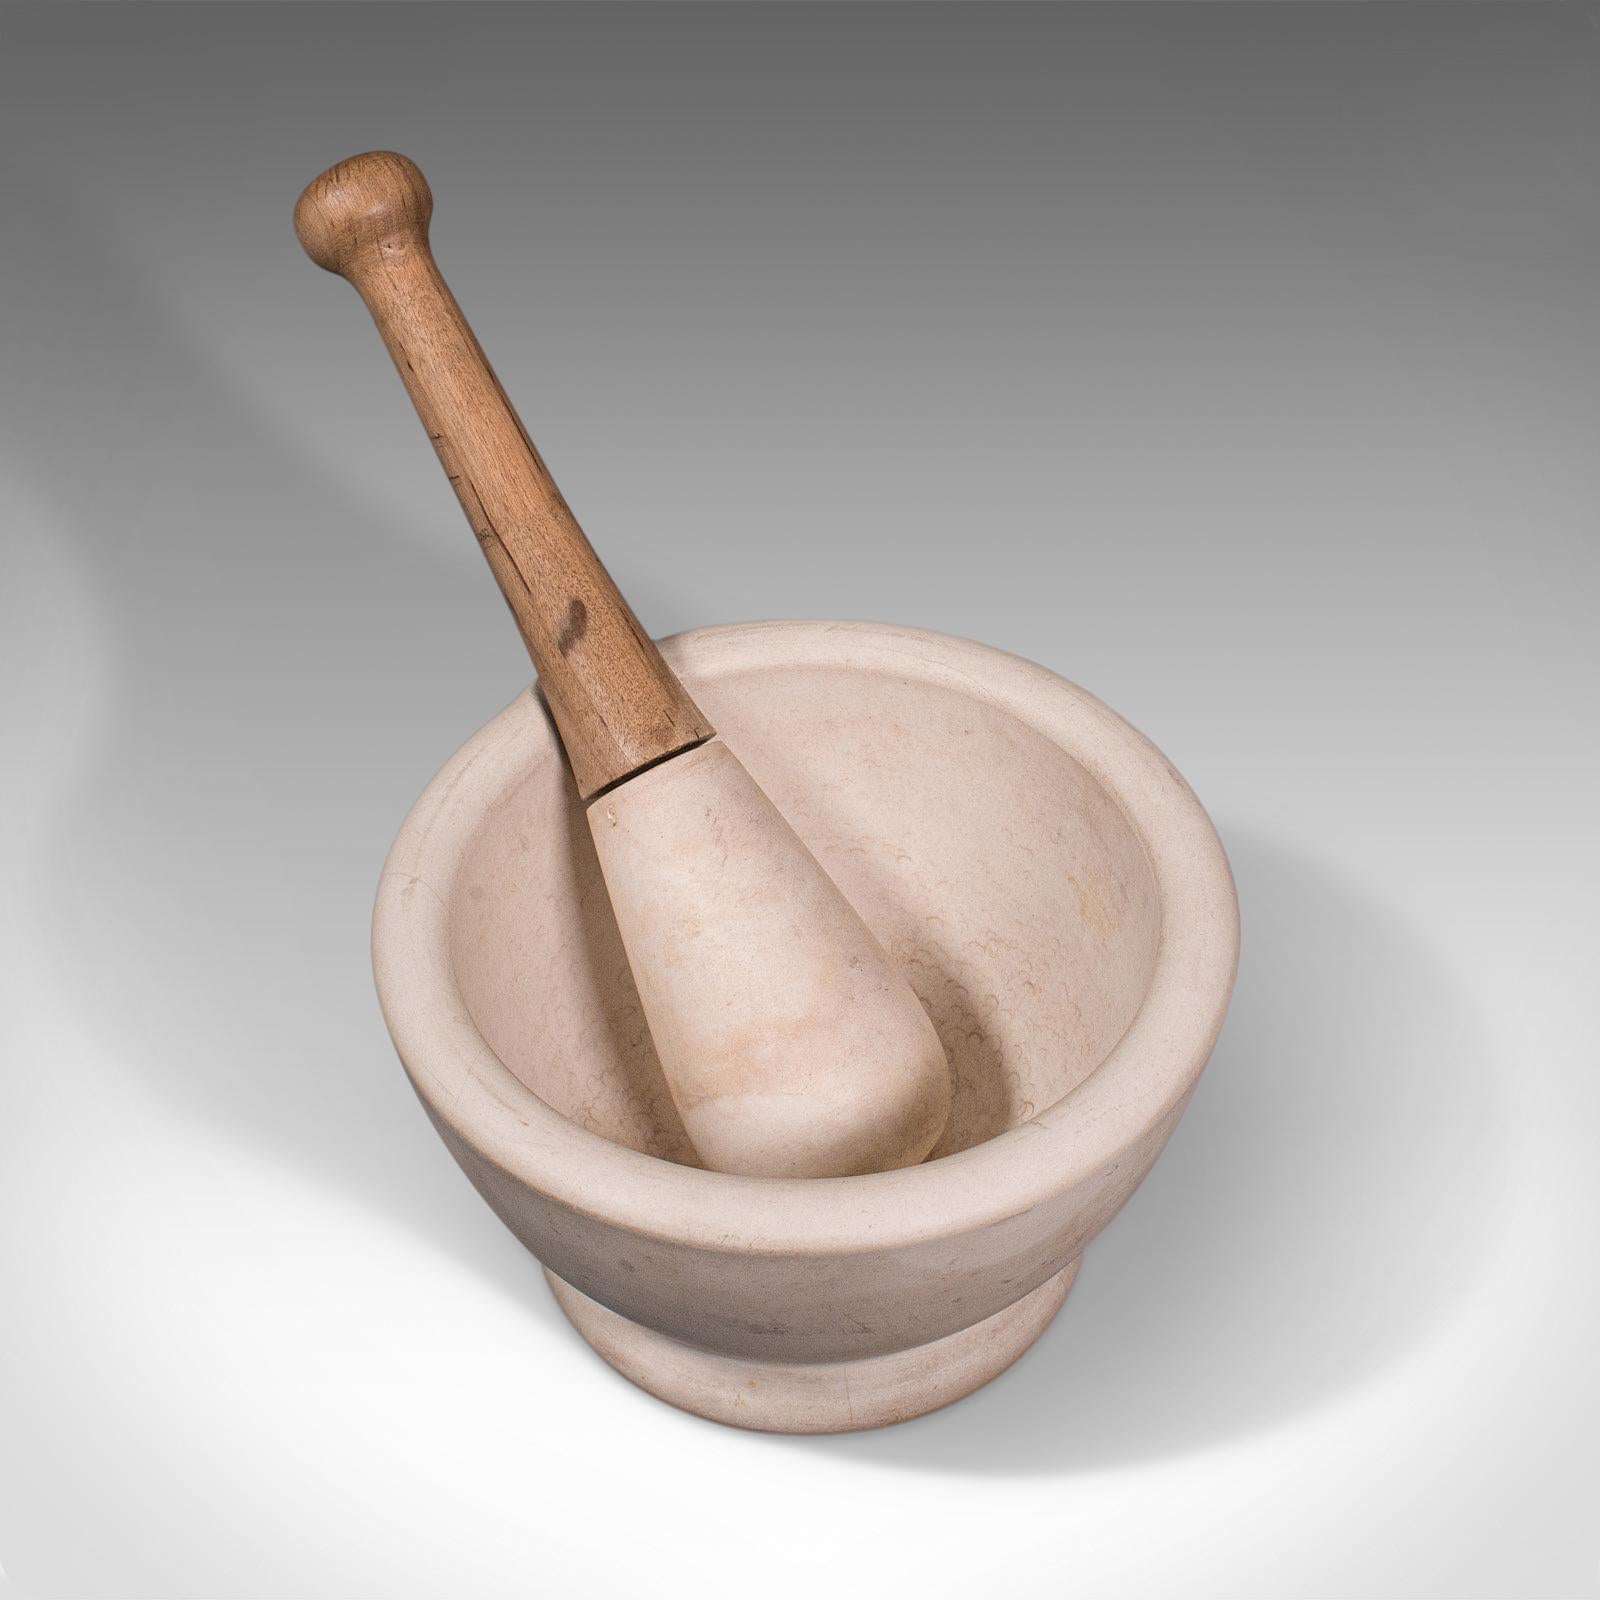 Antique Mortar and Pestle, English, Ceramic, Apothecary, Cookery Tool, Victorian In Good Condition For Sale In Hele, Devon, GB